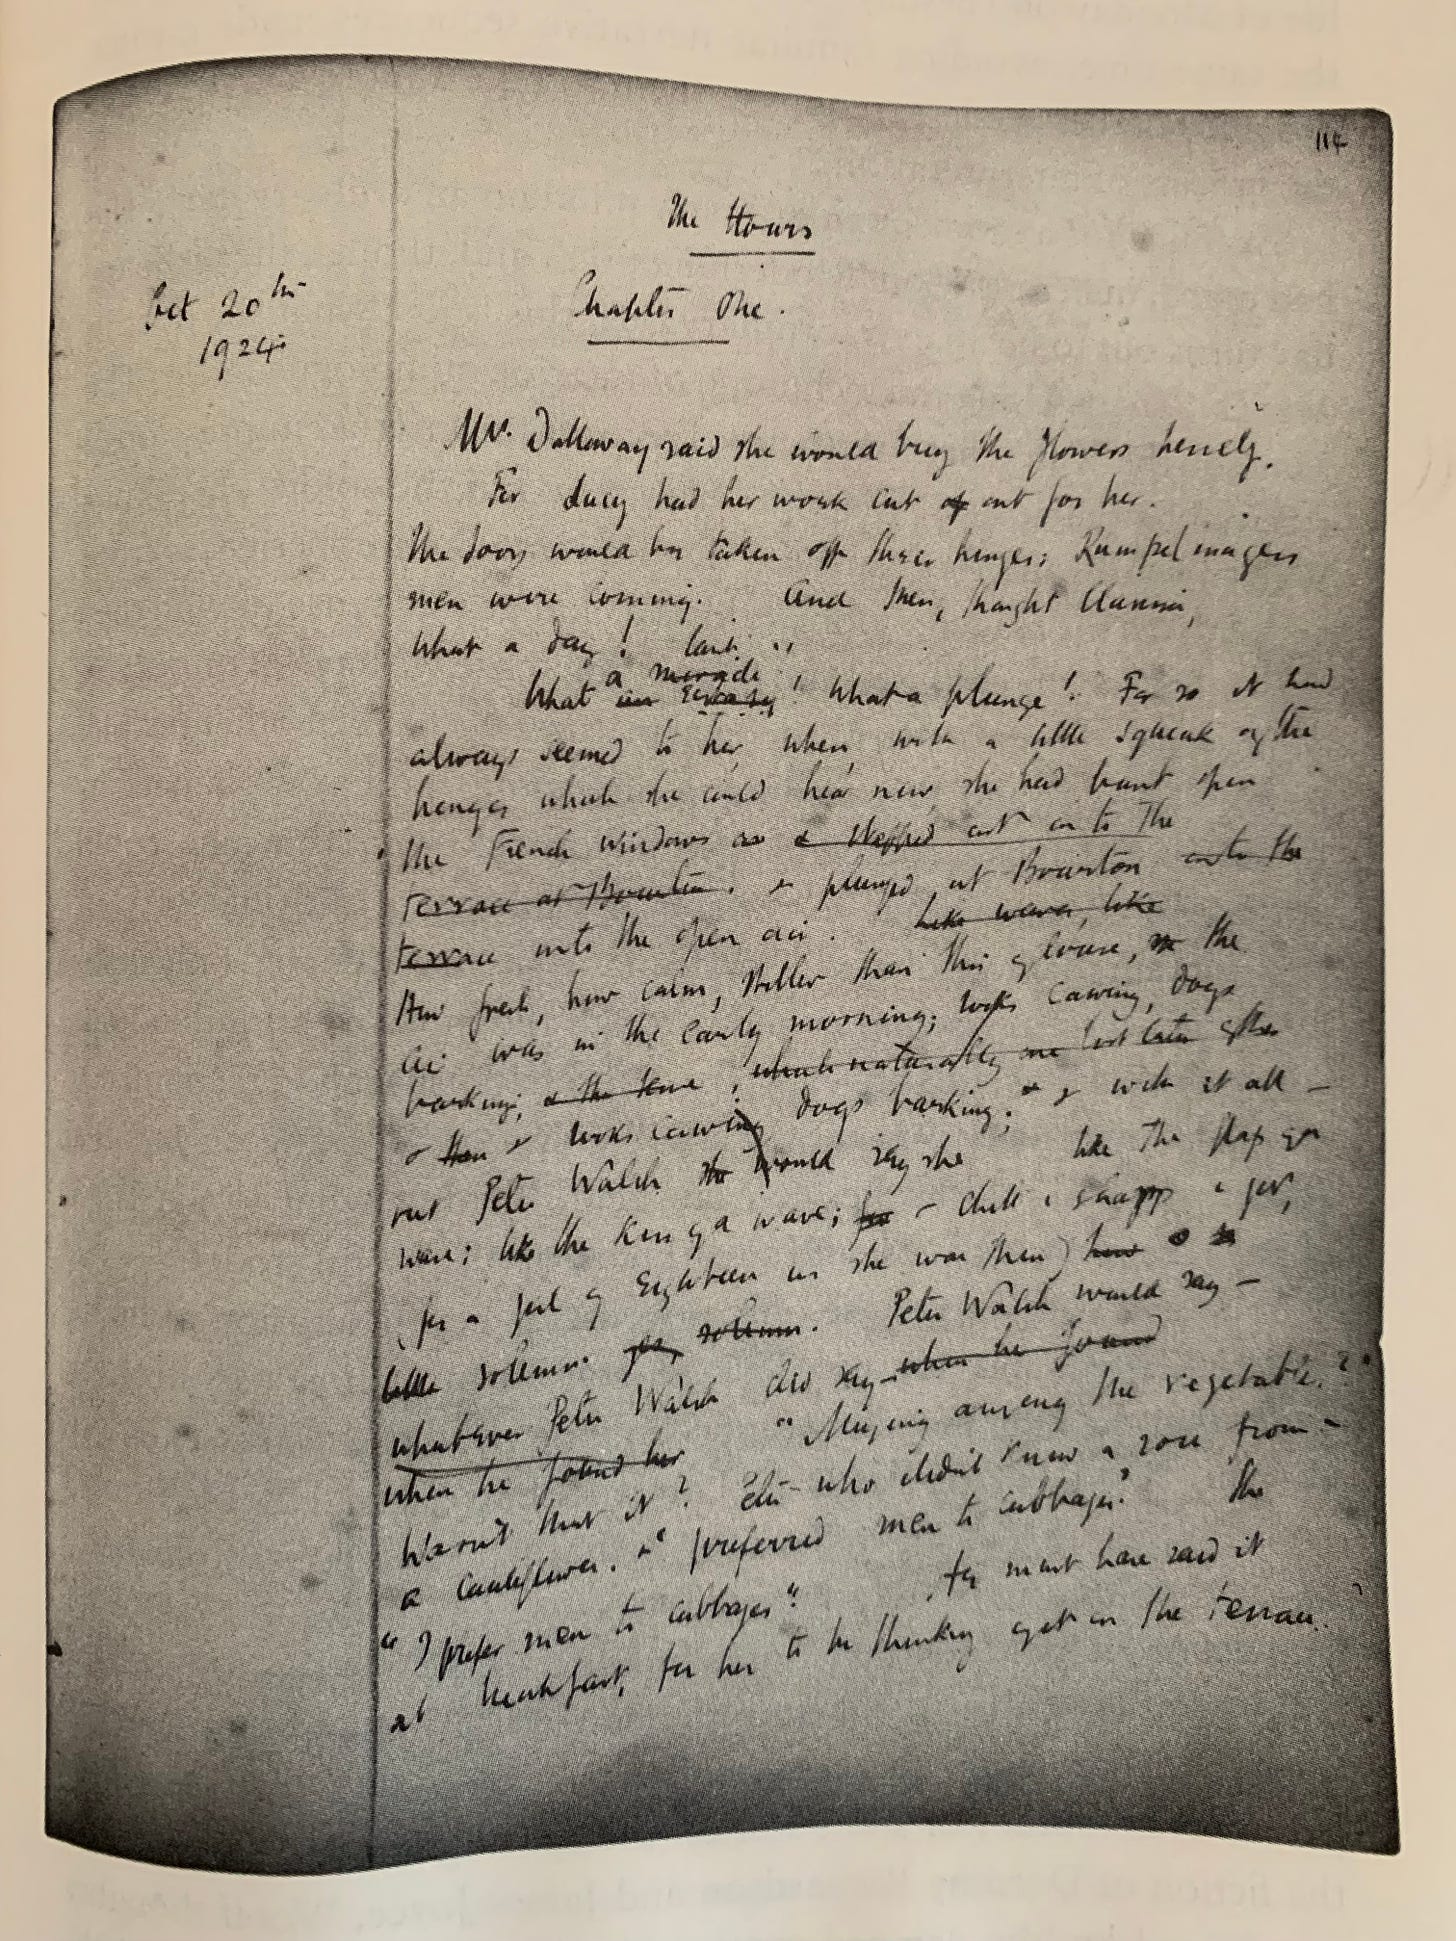 Photograph of a page from Mrs Dalloway manuscript